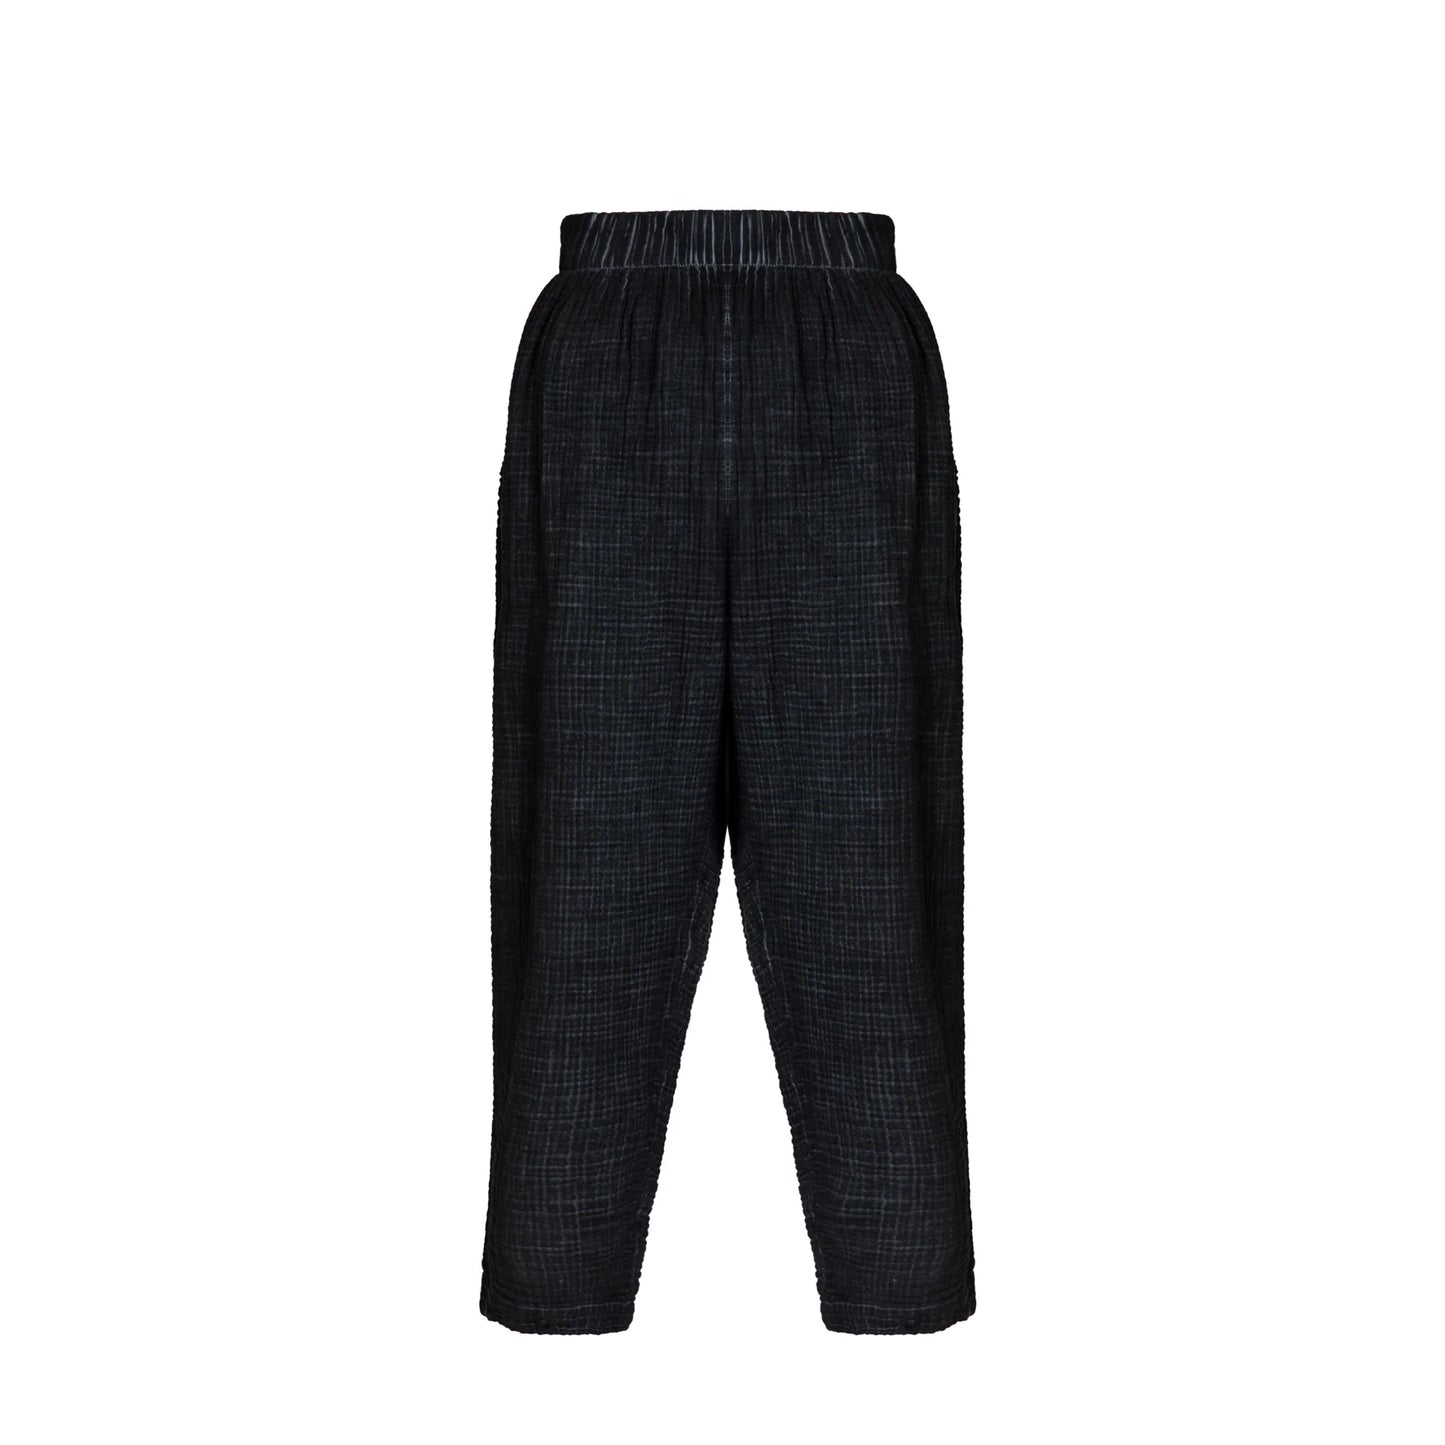 Crinkle Slouchy Pants - One-Sized - Black